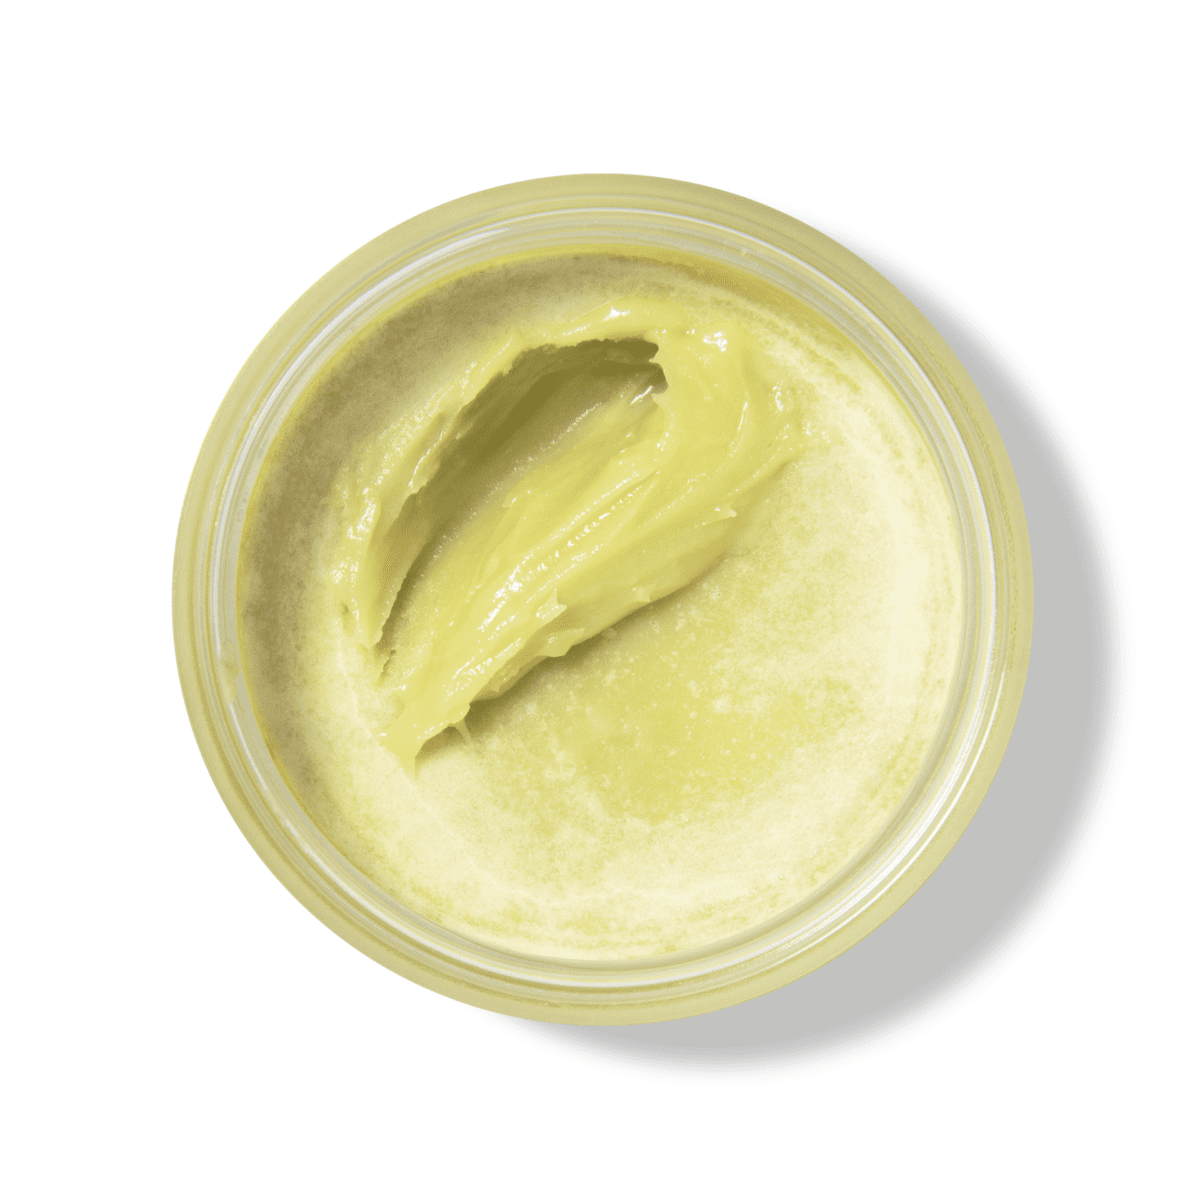 Matcha Cleansing Balm Cleansing Balm Skin Care